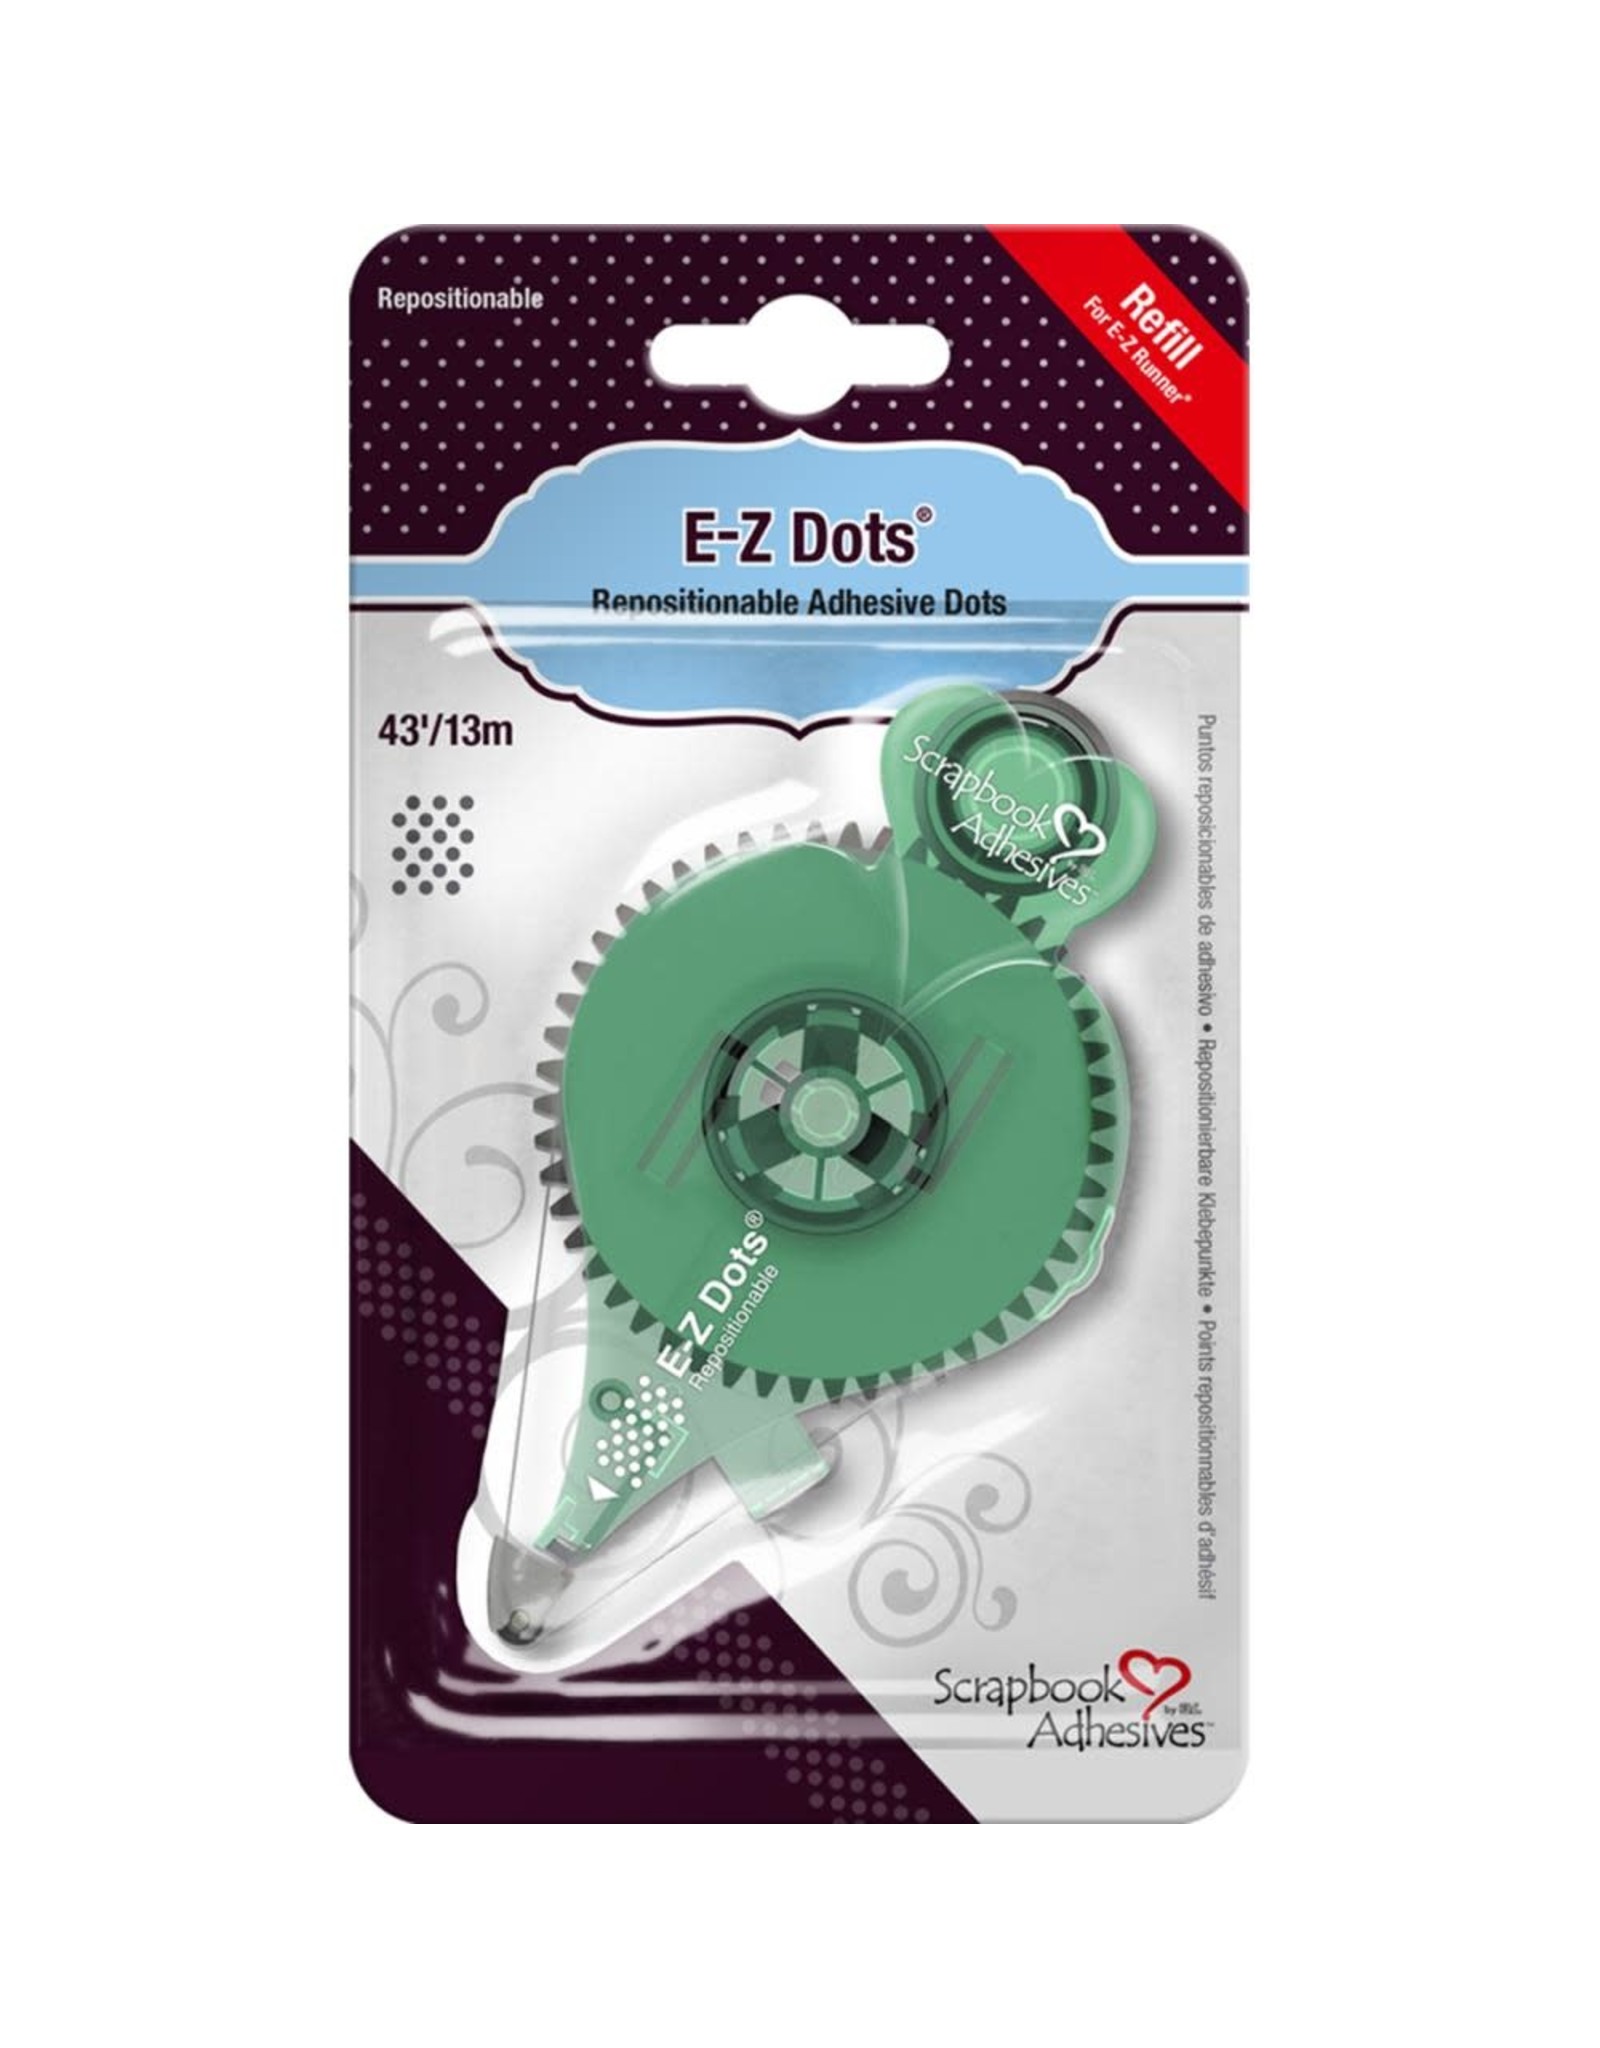 3L SCRAPBOOK ADHESIVES E-Z DOTS REPOSITIONABLE REFILL FOR 01204 RUNNER